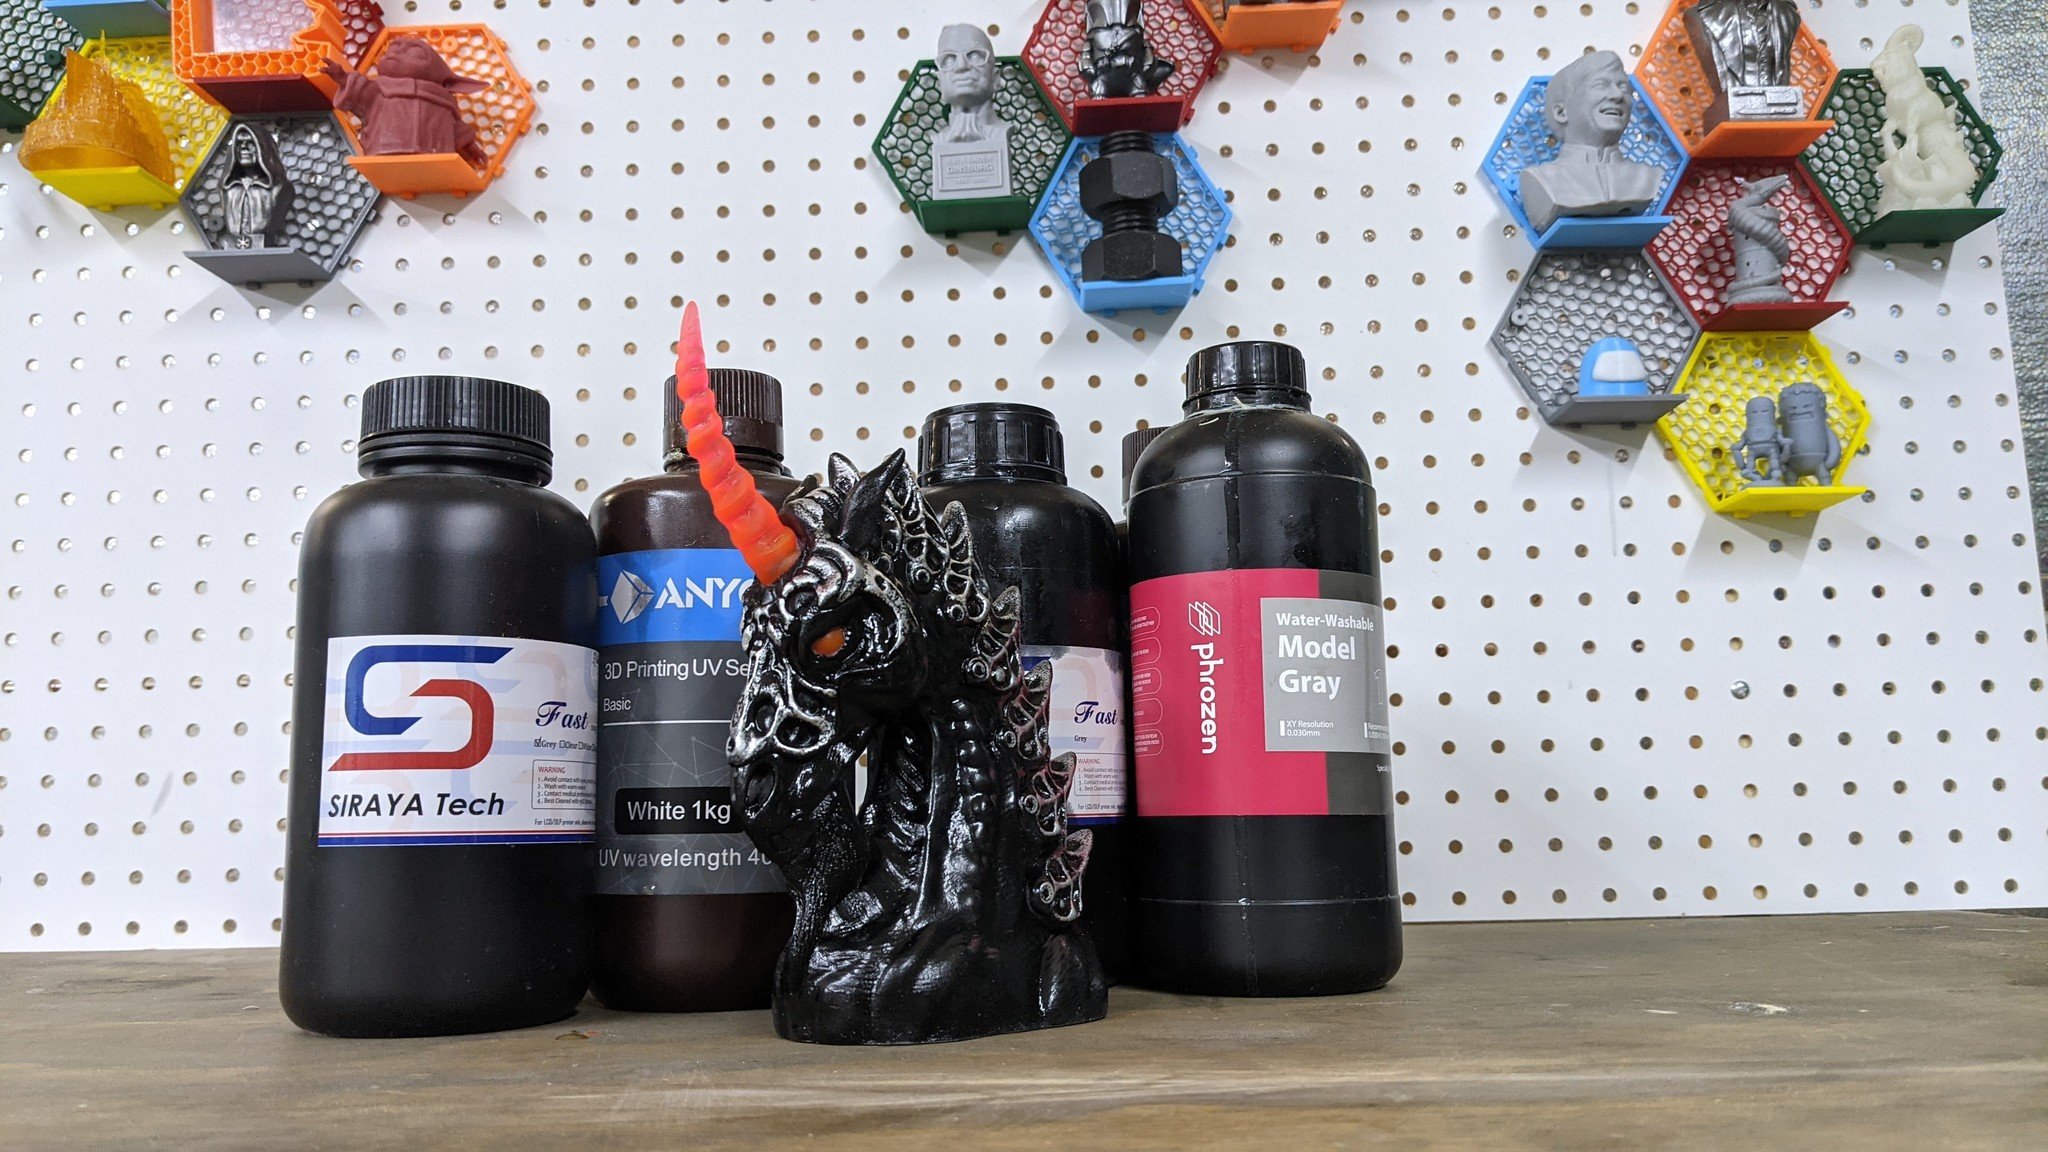 Eco-Friendly 3D Printing: Guide to Anycubic Plant-Based Resin